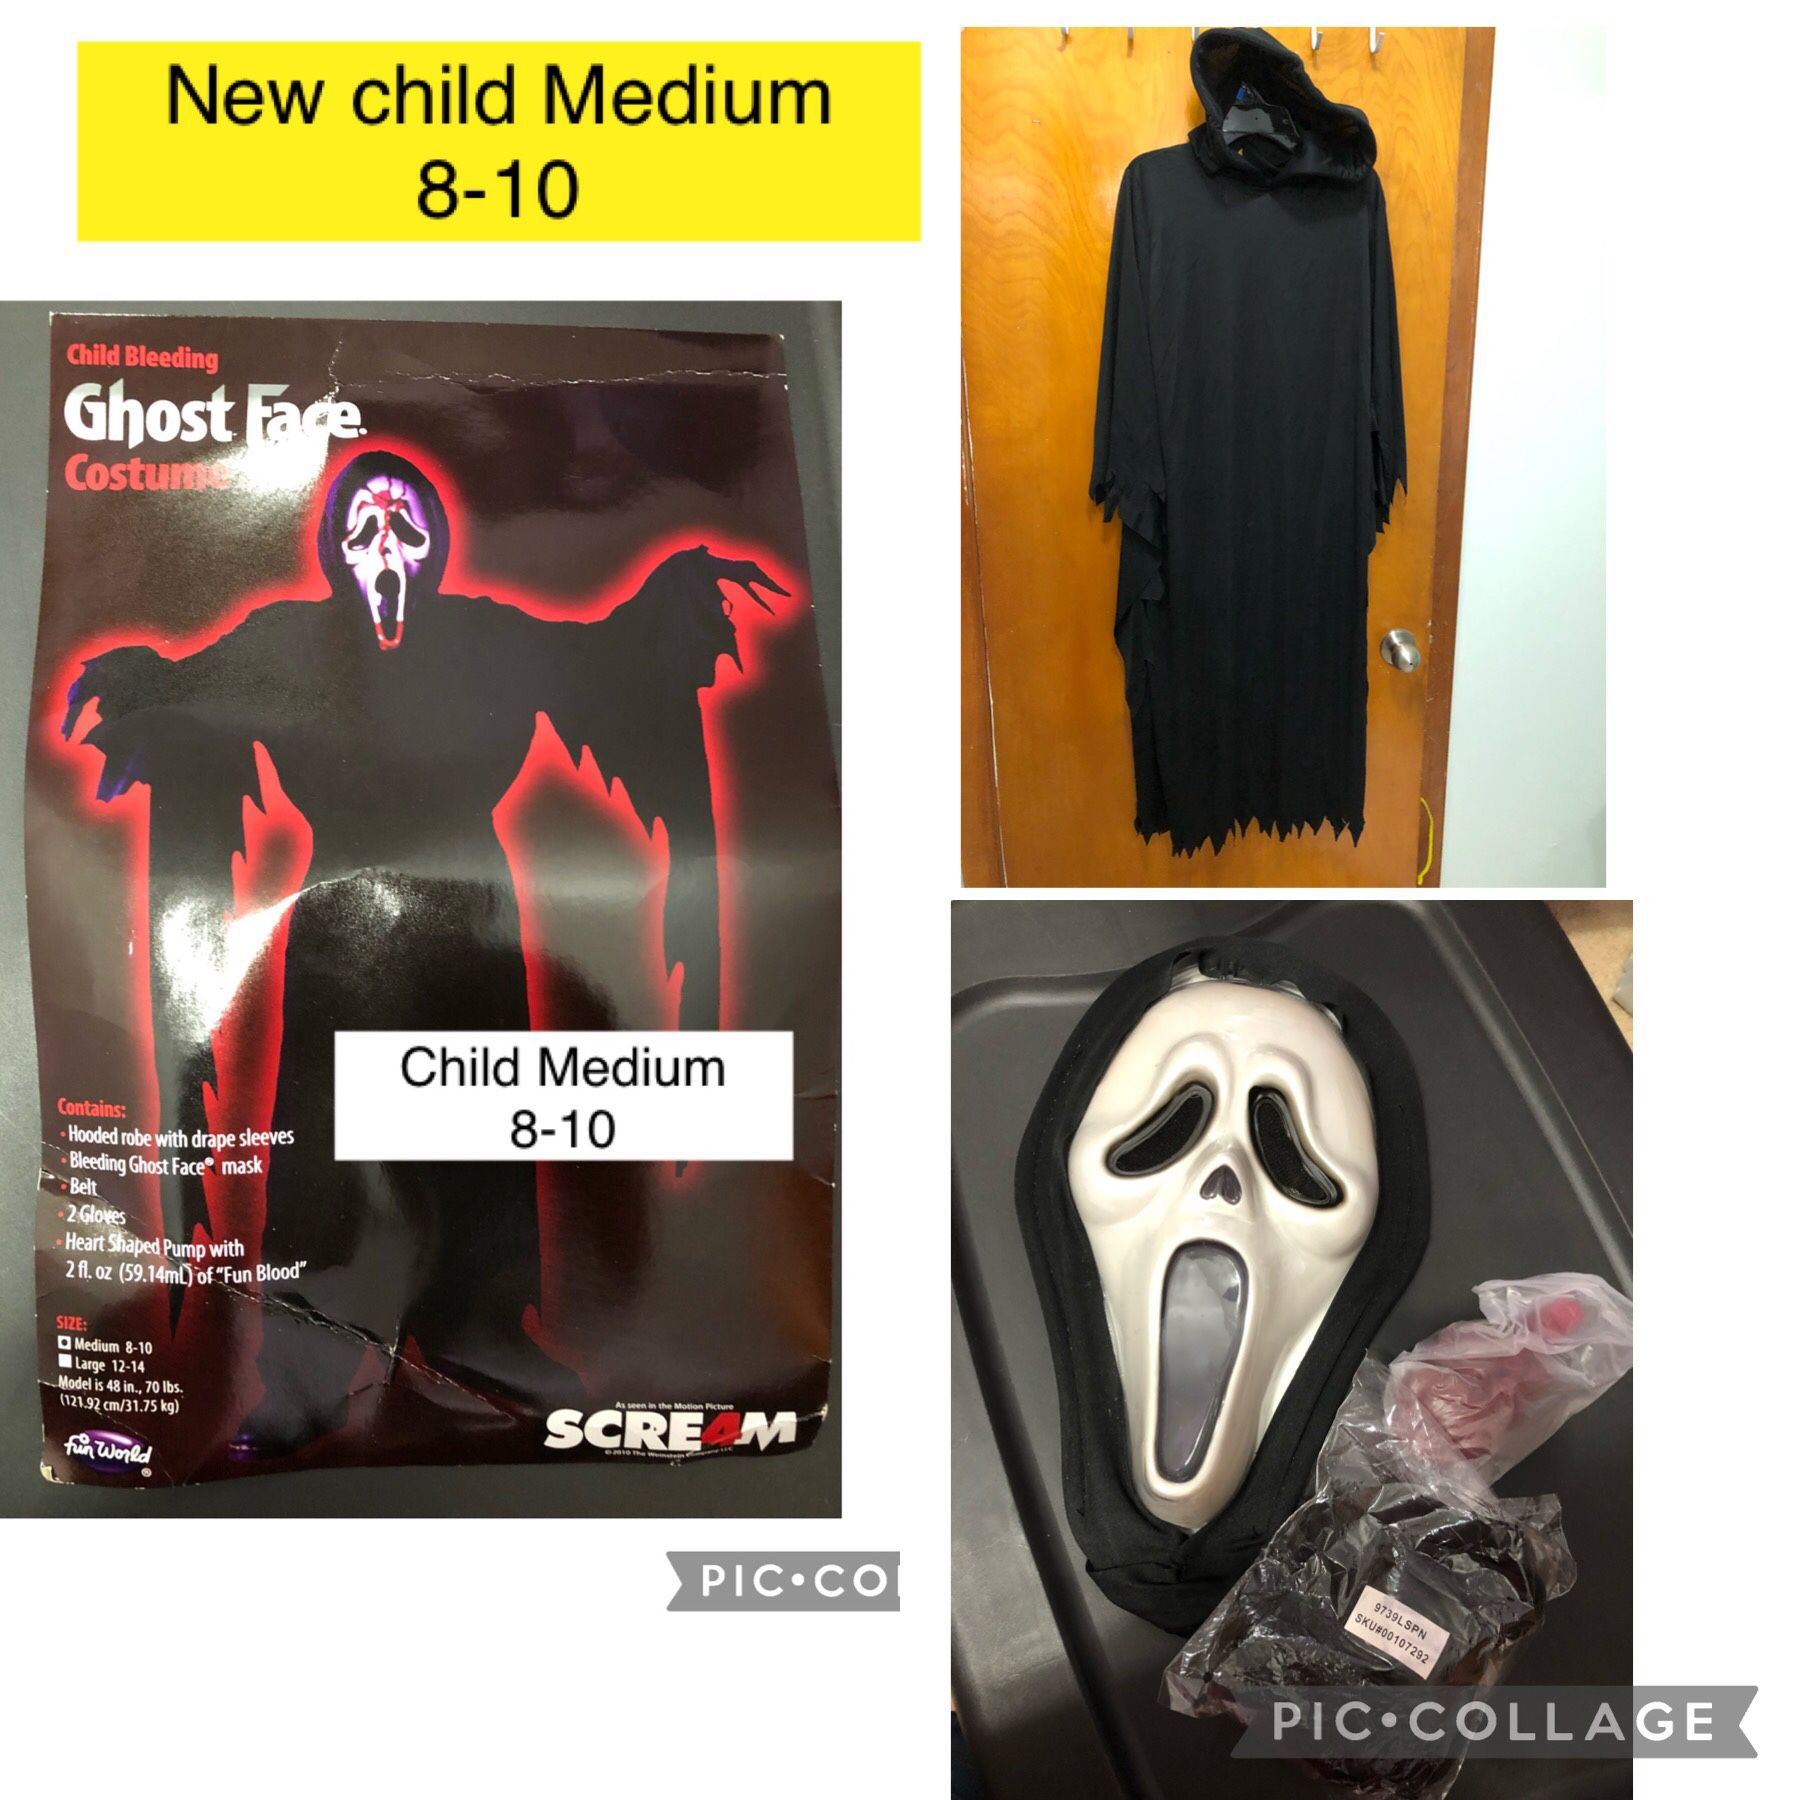 New “ Scream bleeding Ghost Face - Child. Halloween costume.Size Medium 8-10 . Includes hooded robe with drape sleeves , bleeding ghost face mask, bel